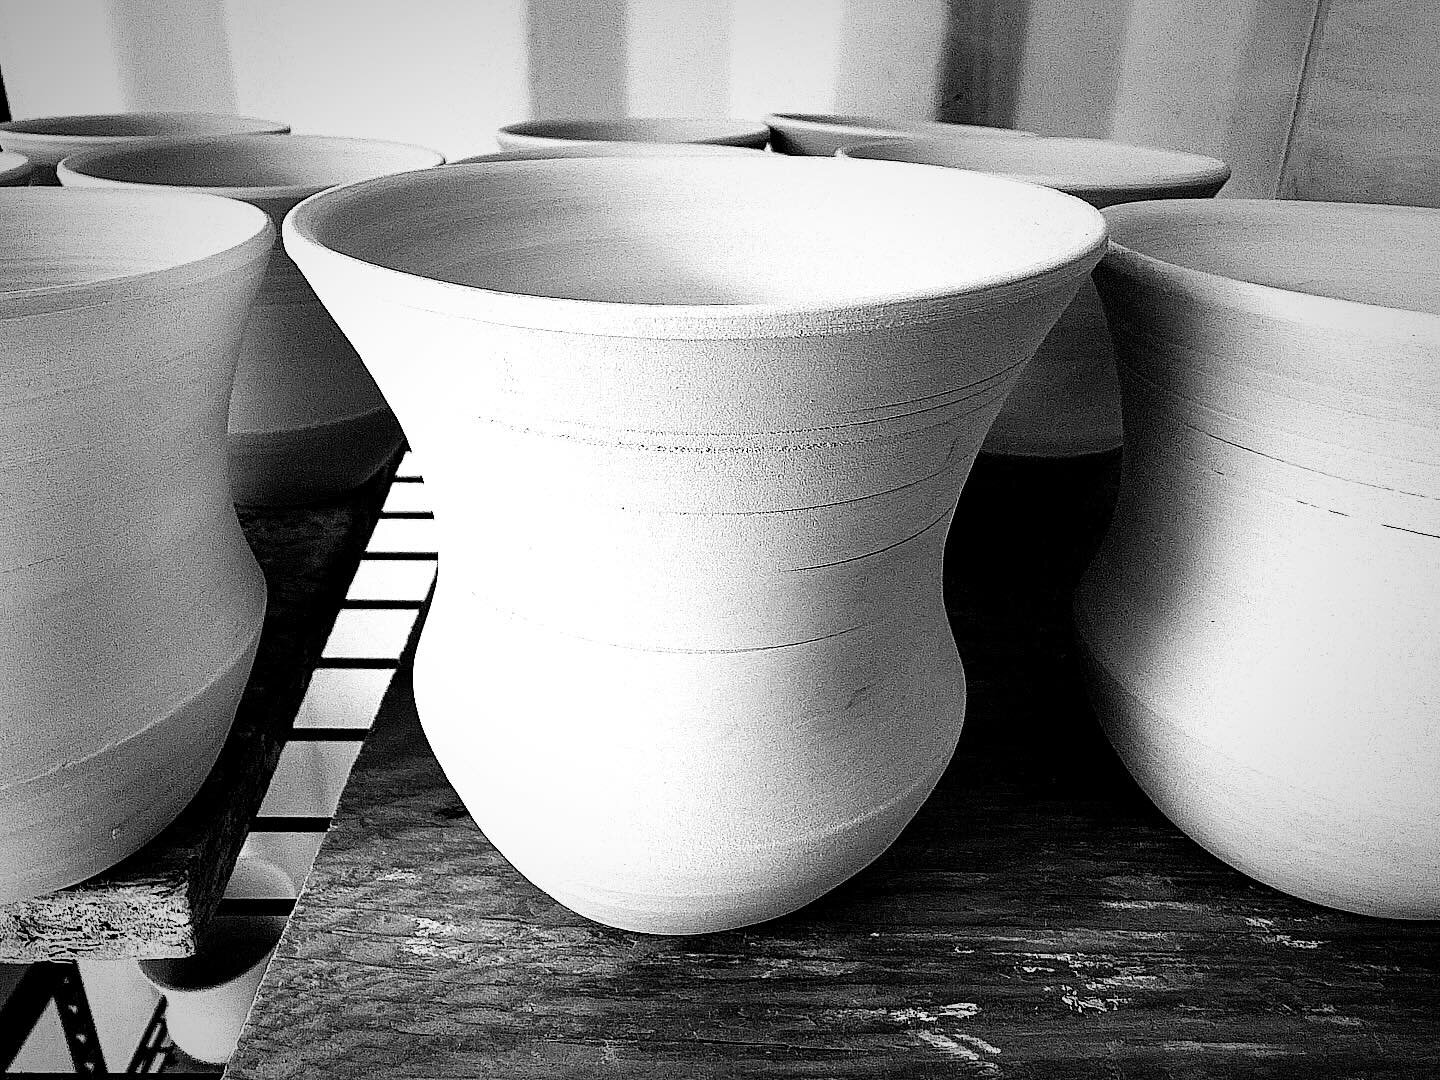 Anticipating my spring time in Greece, I&rsquo;ve designed this limited release porcelain cup influenced by Hellenic forms. Here is the first batch waiting for their turn in the bisque kiln. They are cooling now and I will glaze and fire a test next.